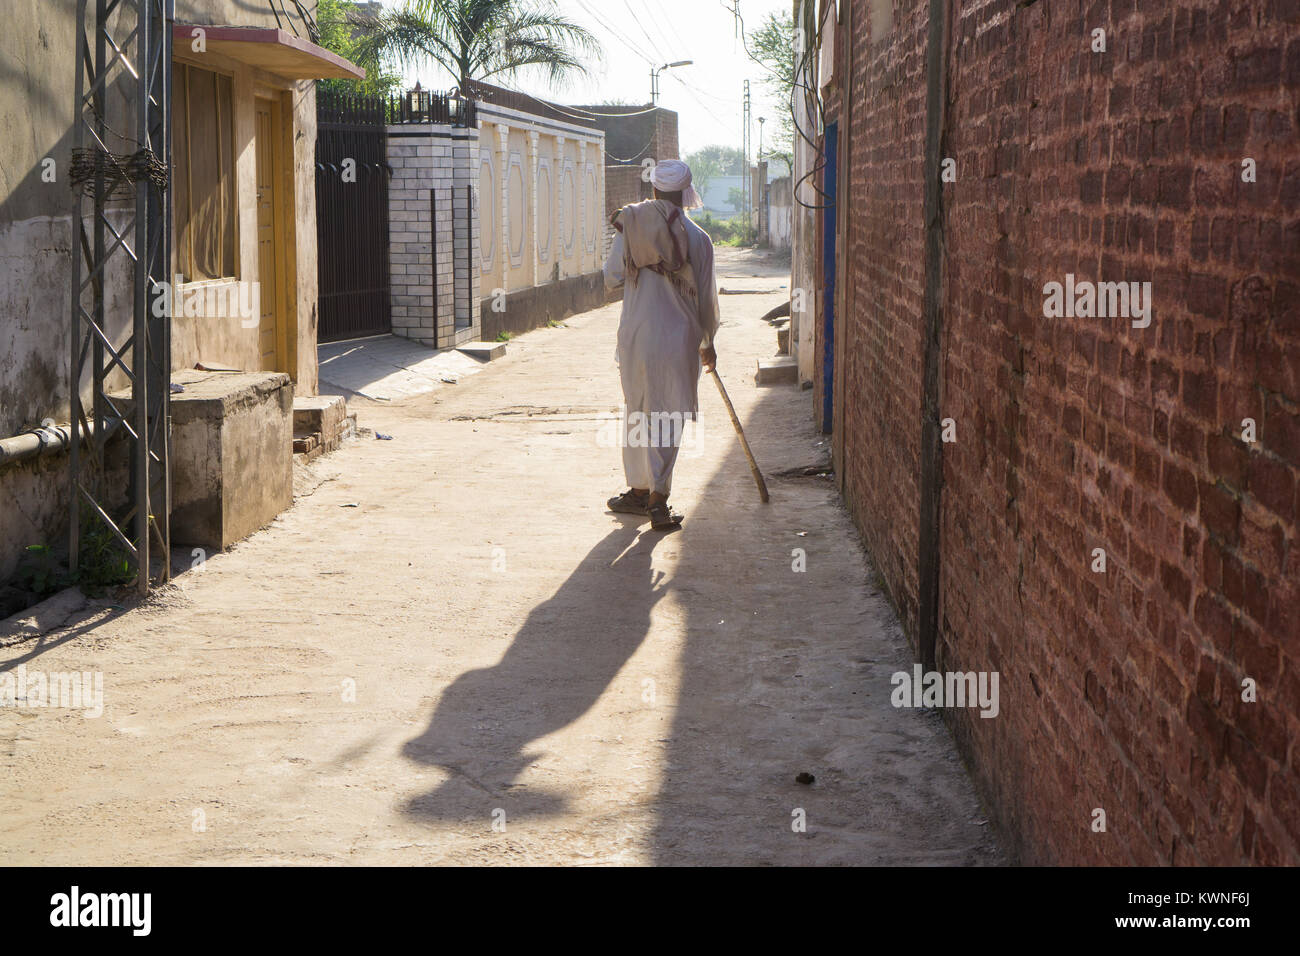 Rear view of an old Pakistani man walking in an alley Stock Photo